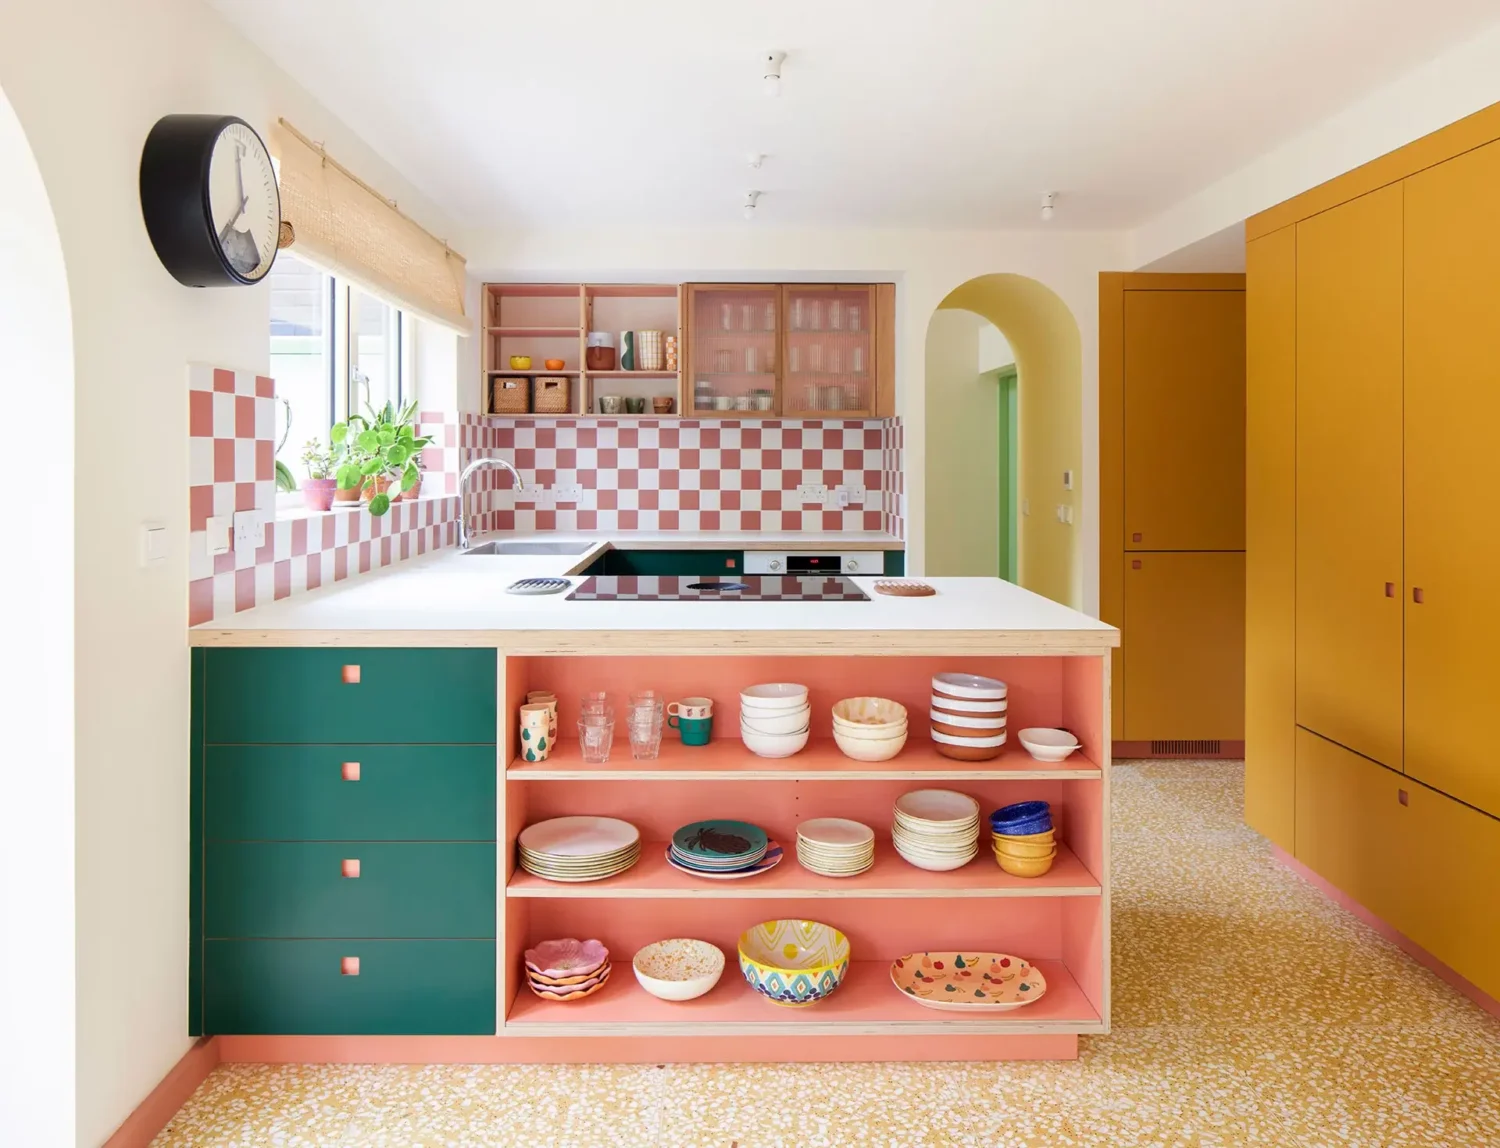 pluck-kitchen-multi-colored-cabinets-nordroom